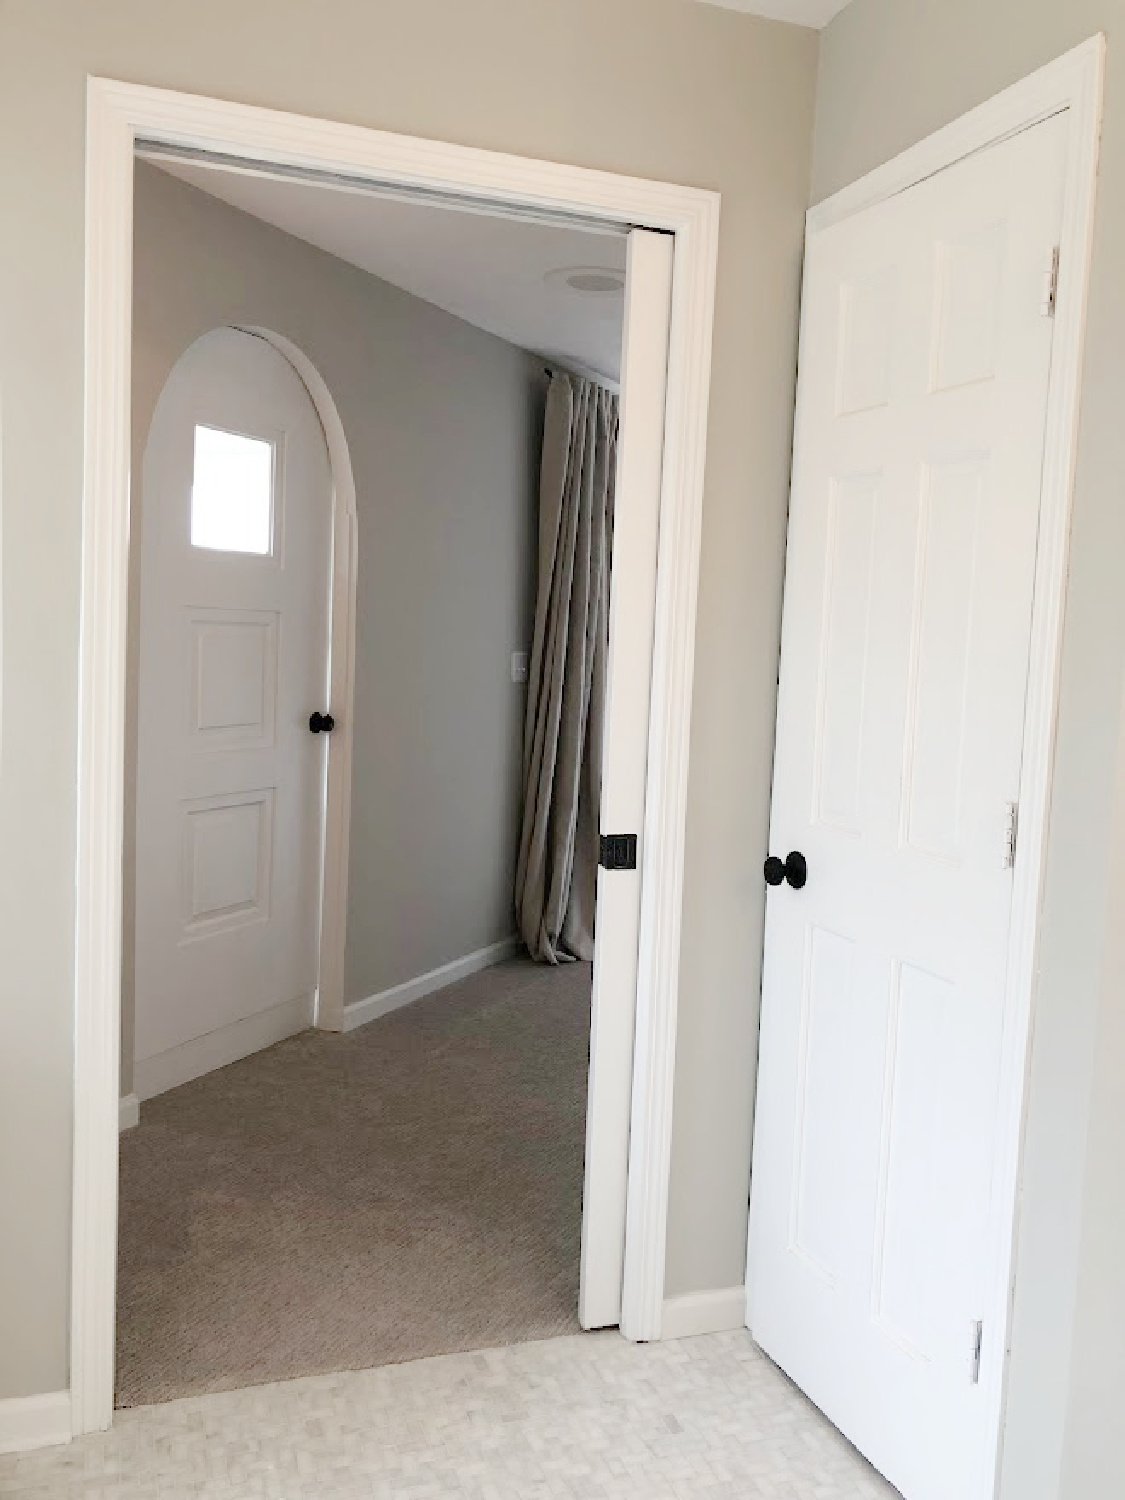 View of white painted door to WC, pocket door, and arched door to sitting room in our renovated suite at the Georgian - Hello Lovely Studio.